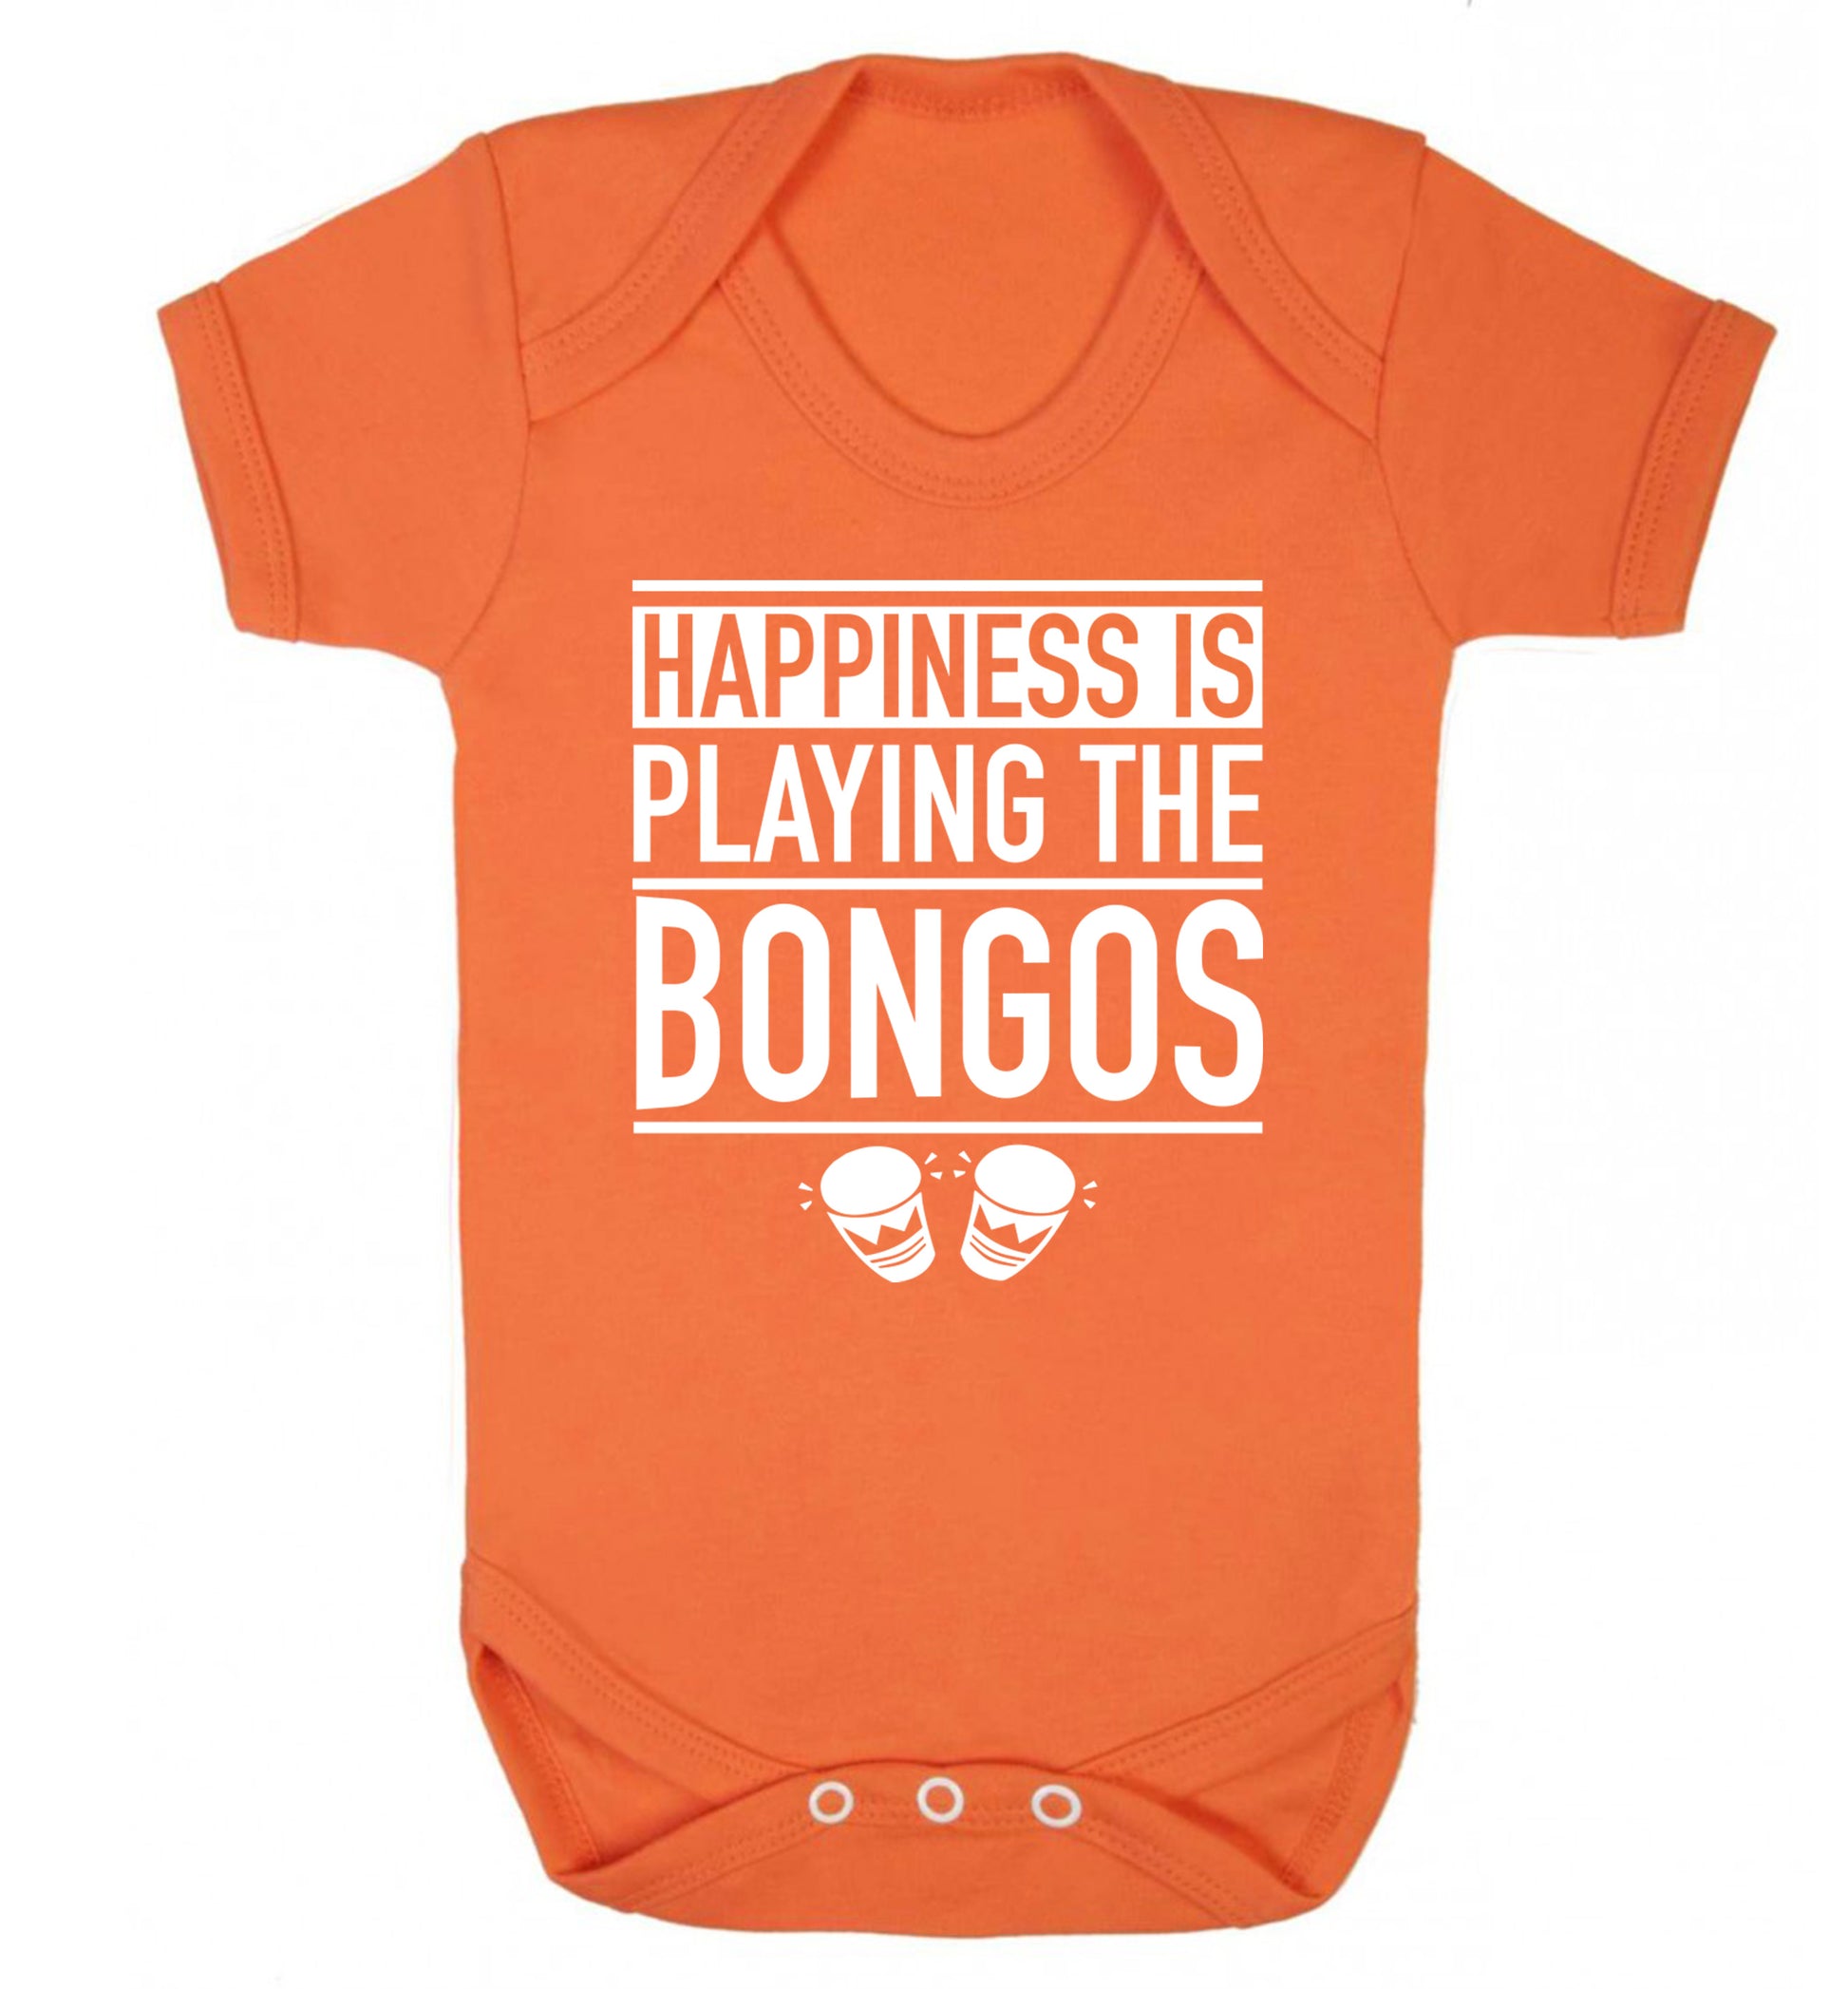 Happiness is playing the bongos Baby Vest orange 18-24 months